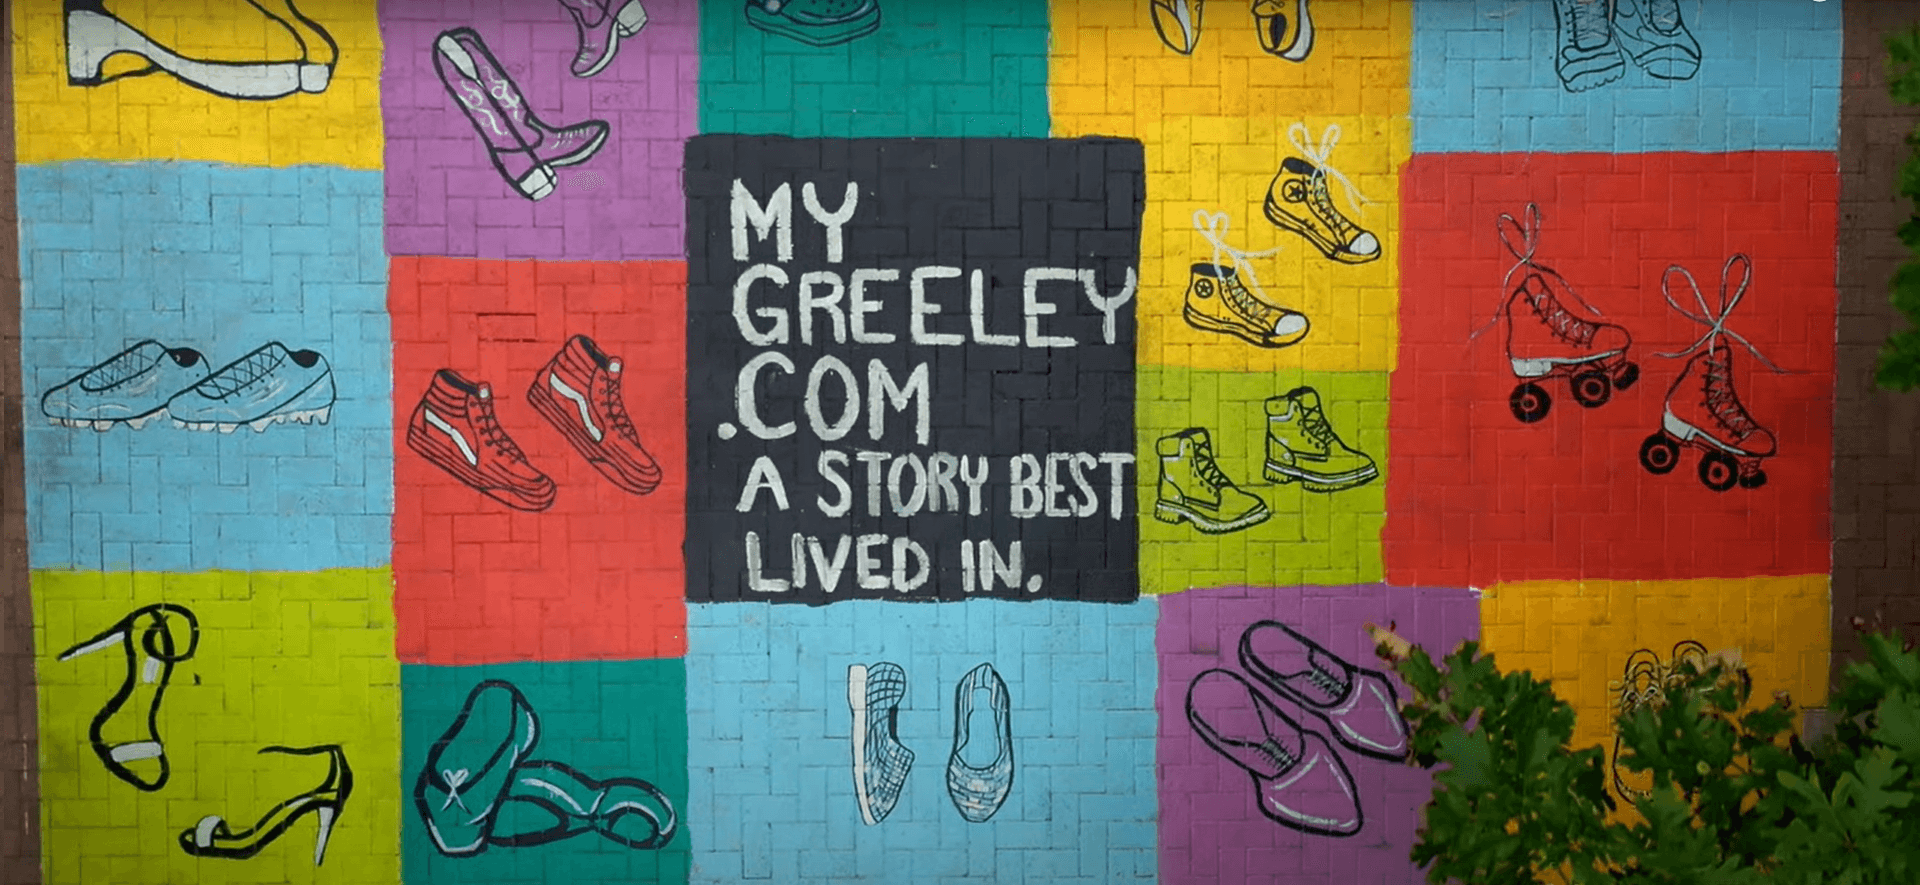 My Greeley campaign